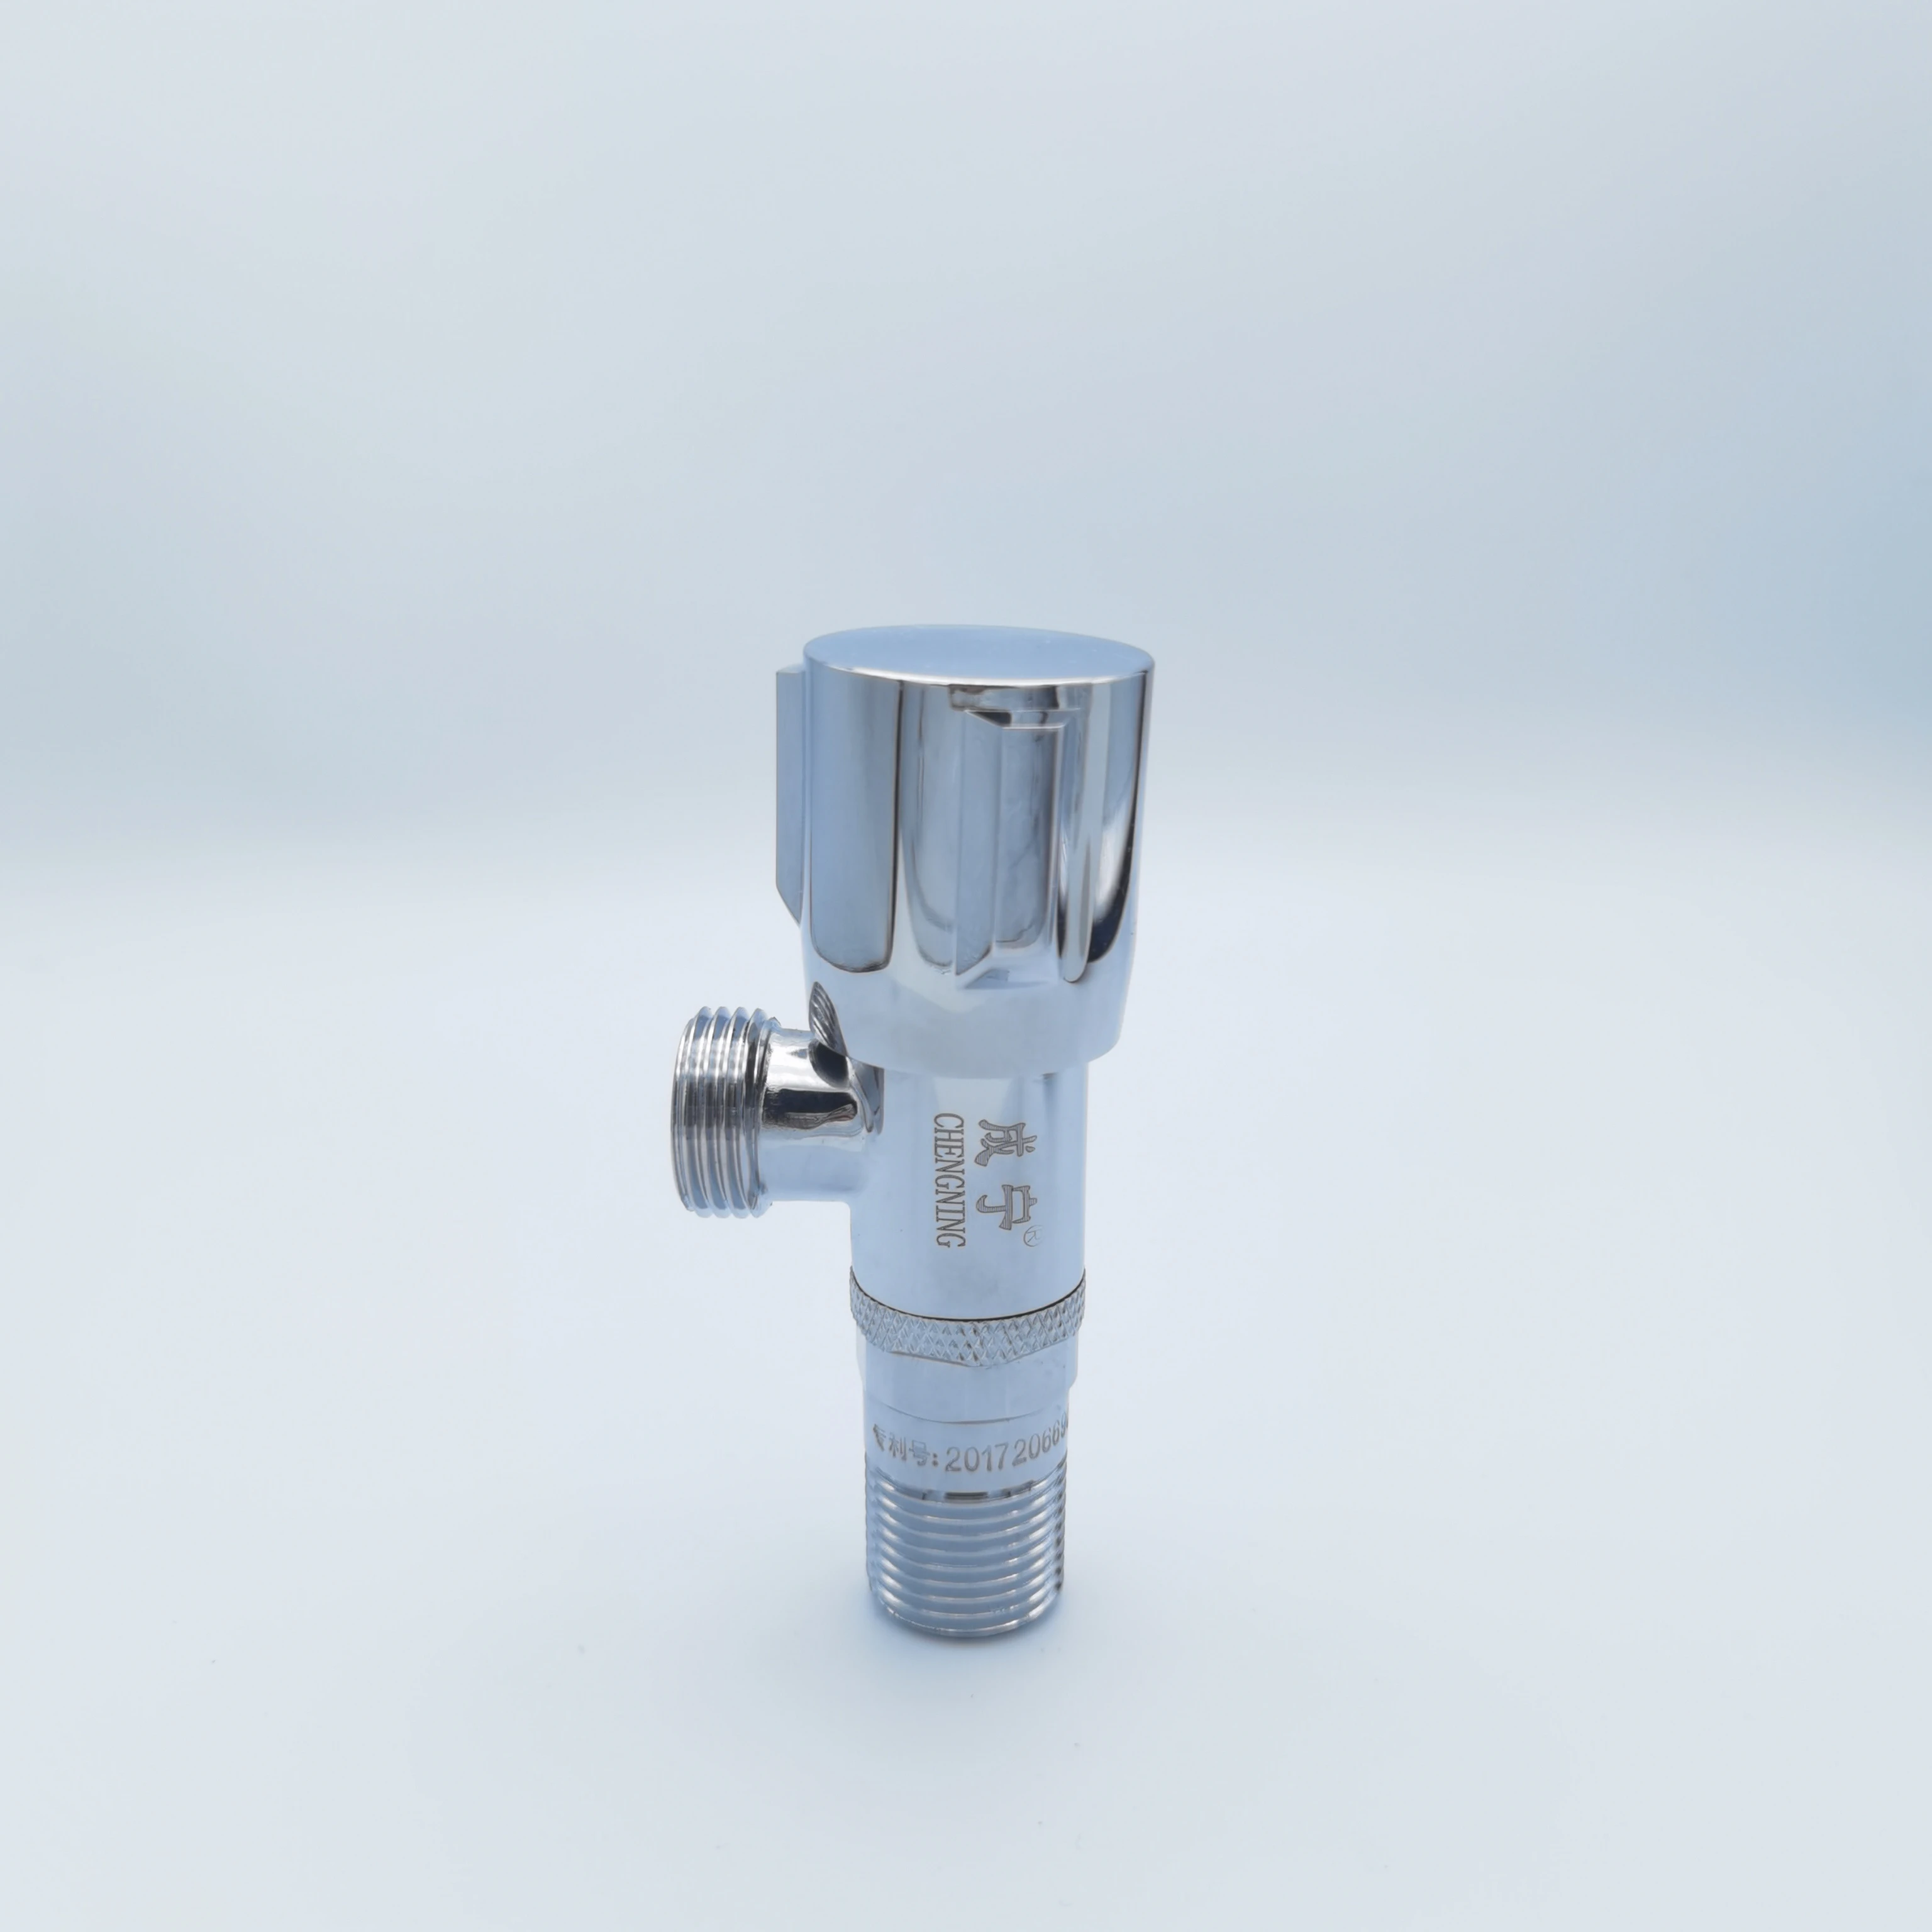 Durable brass fittings water stop angle valve outlet ceramic spindle rotate freely easy to install